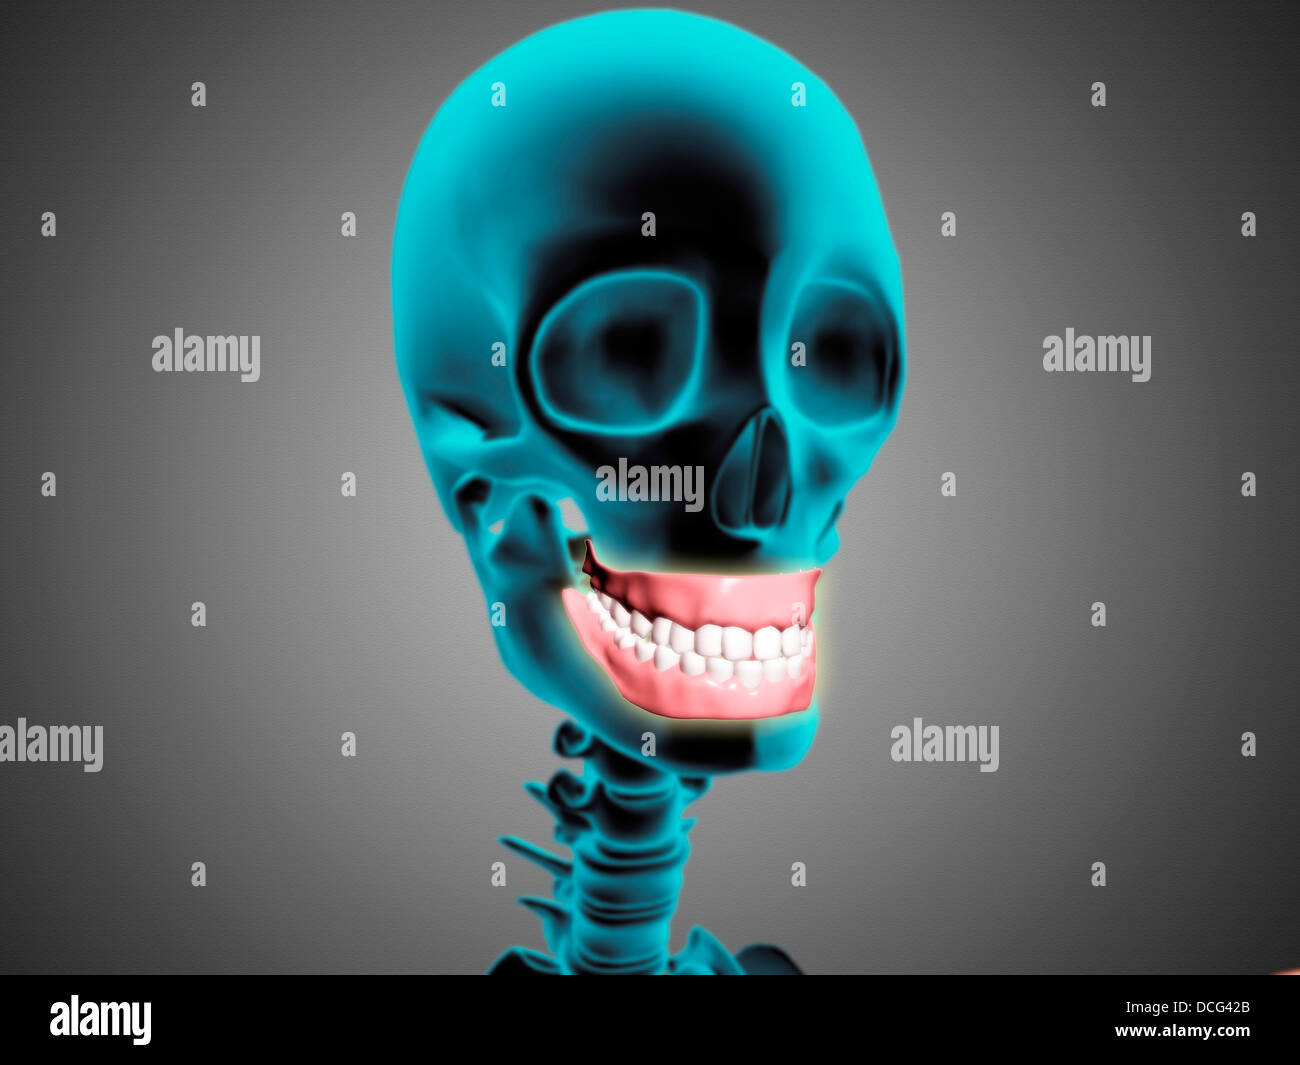 X-ray view of human skeleton showing teeth and gums. Stock Photo